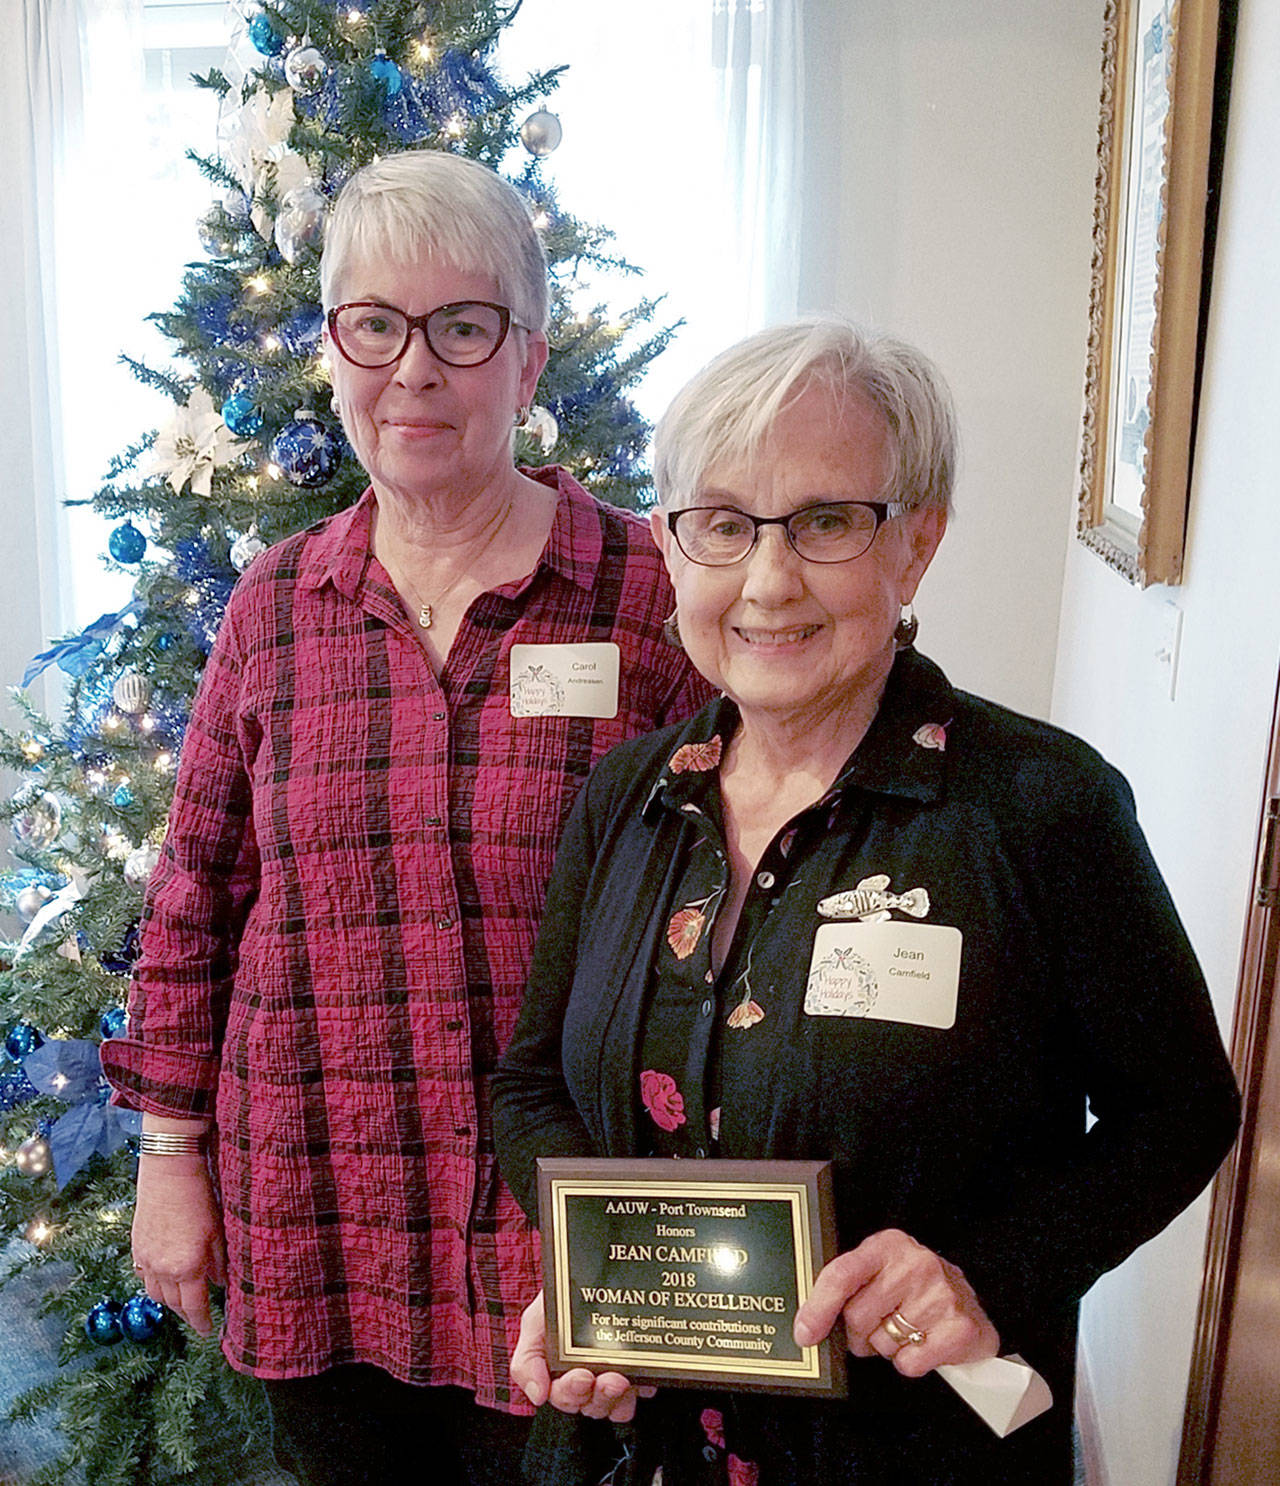 Carol Andreasen, selection committee chair, and the American Association of University Women’s 2018 Woman of Excellence recipient, Jean Camfield. (American Association of University Women)